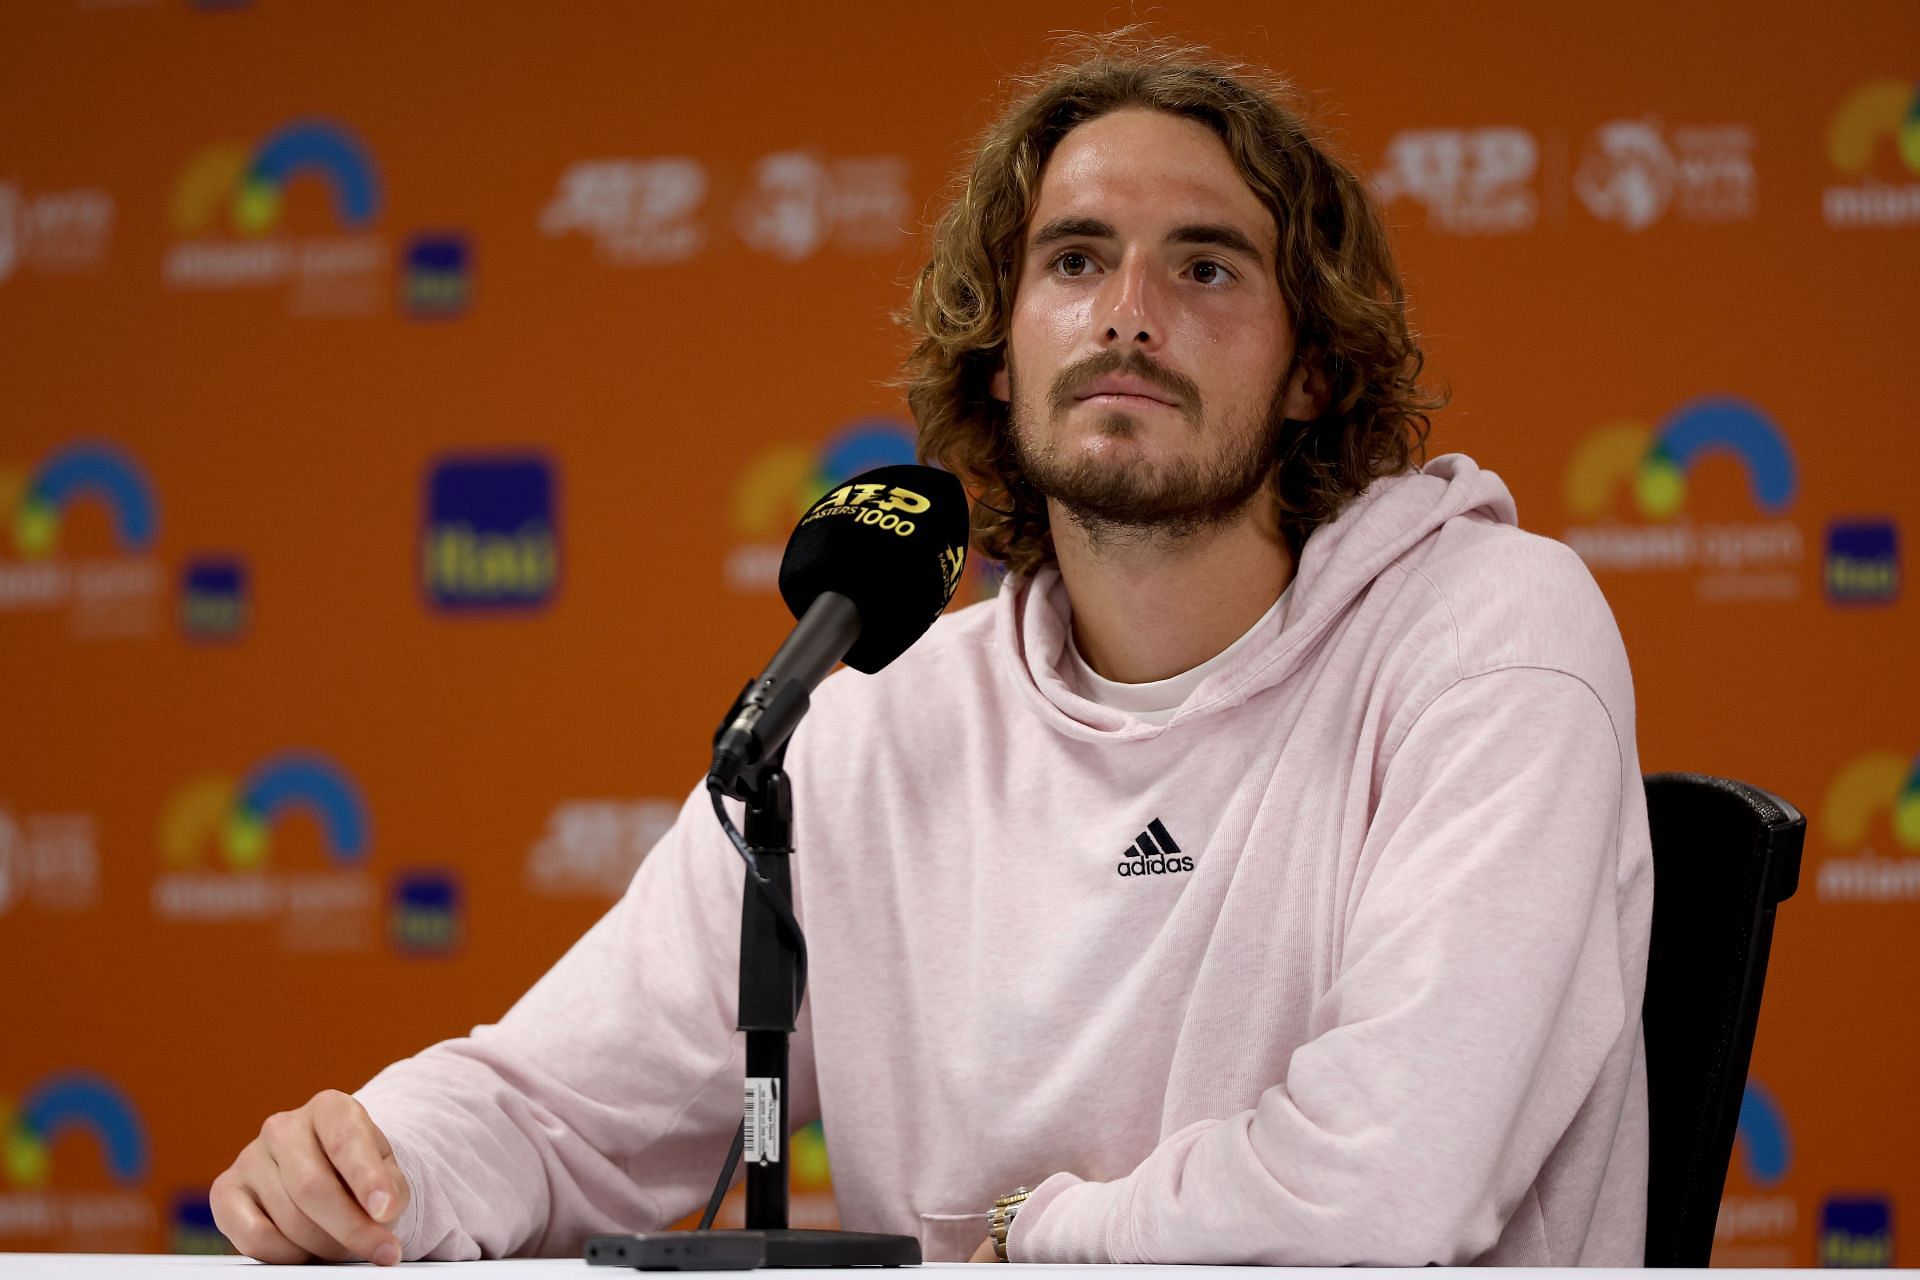 Stefanos Tsitsipas has reached the French Open fourth round